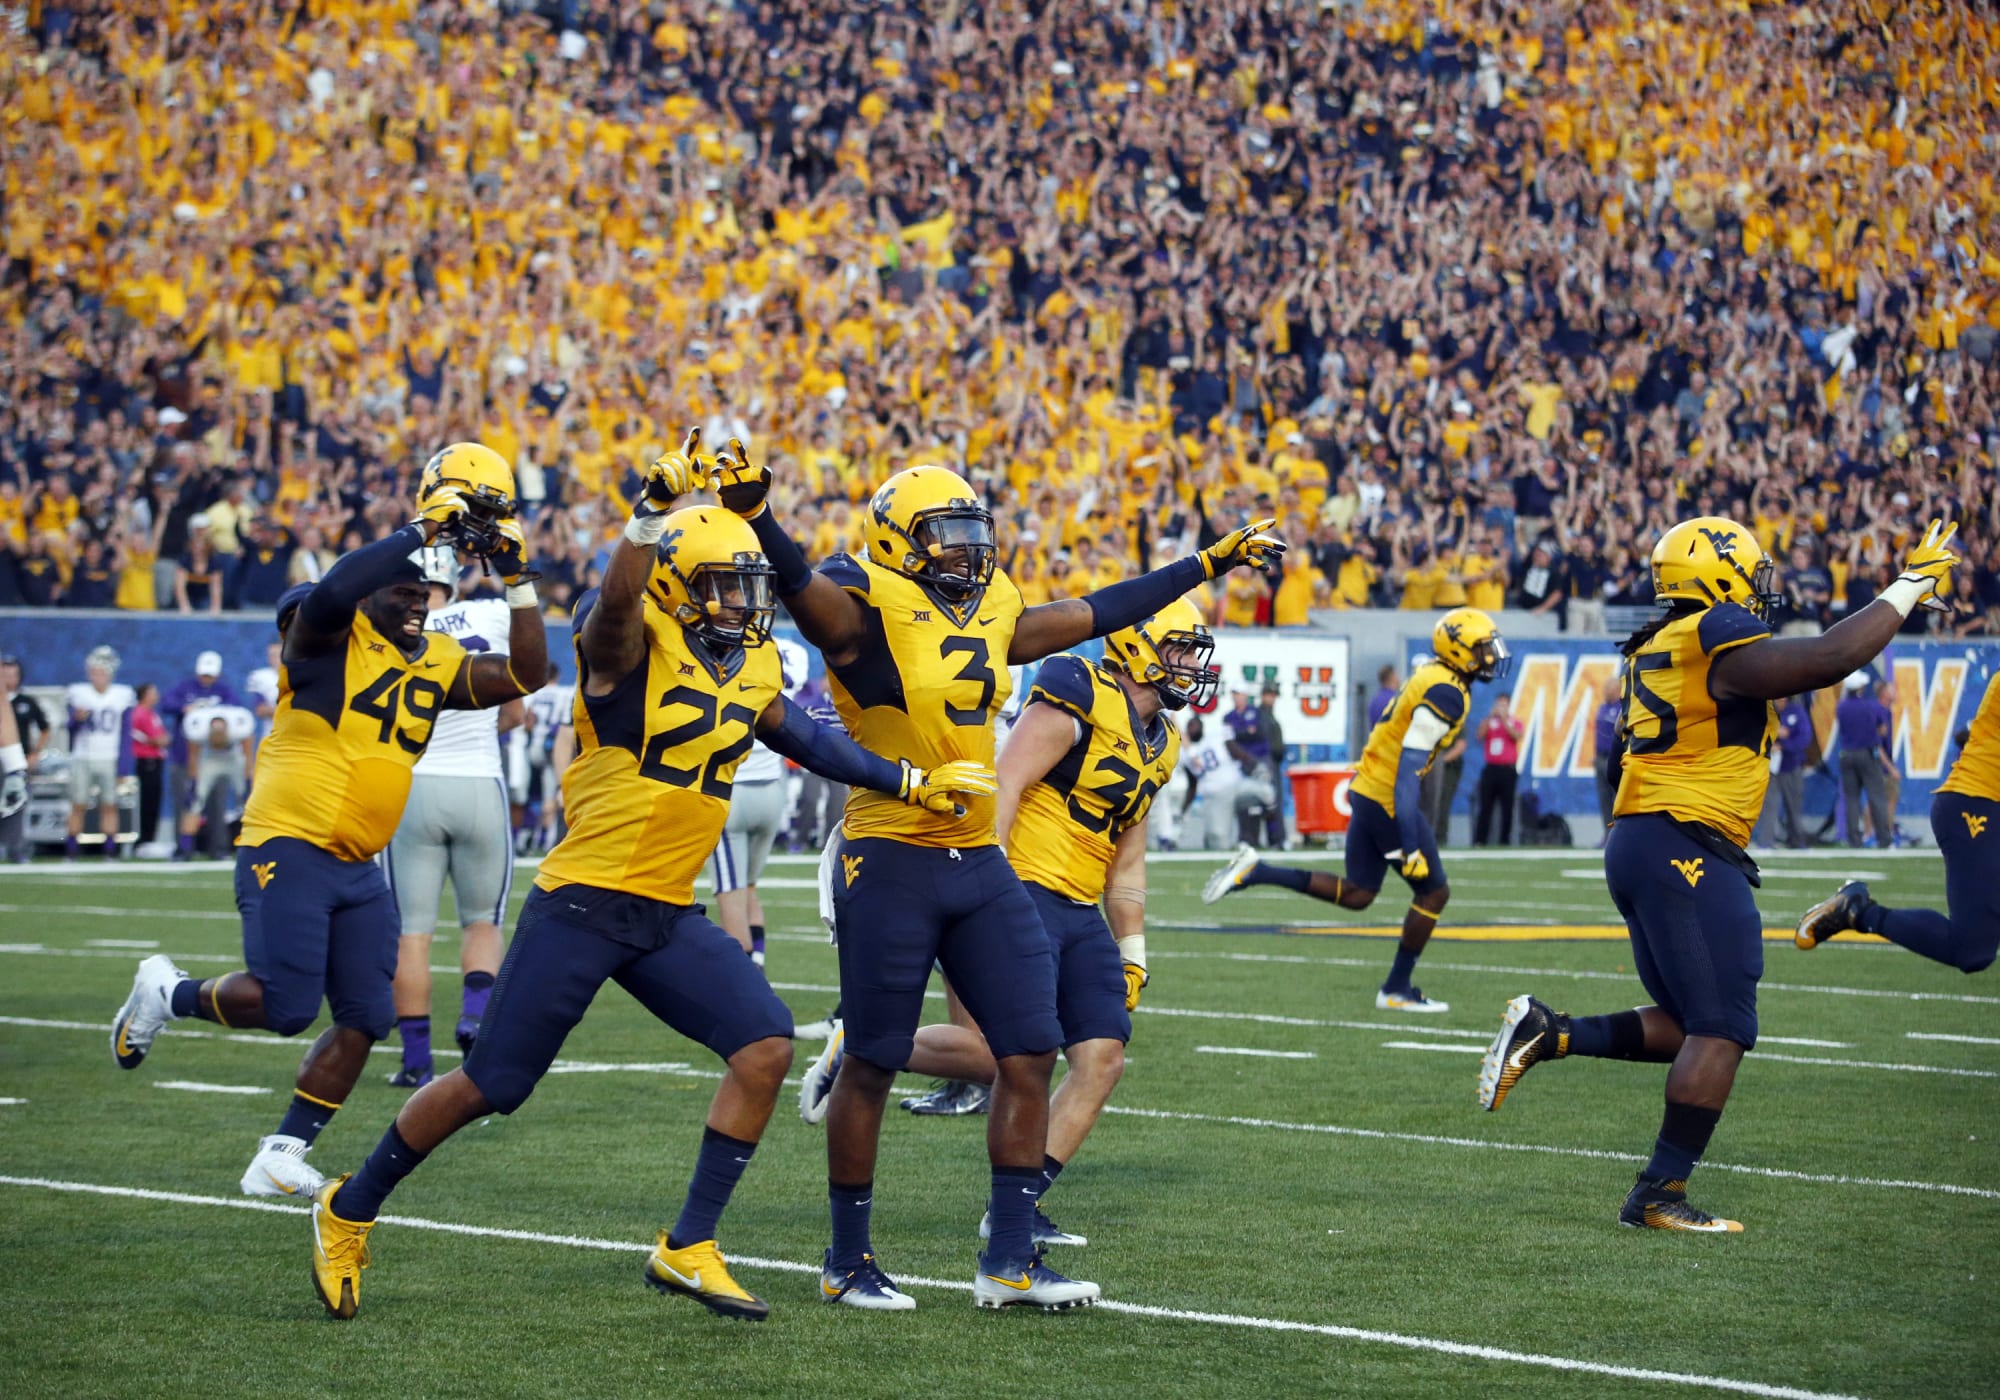 WVU football Annual Spring Game needs a boost